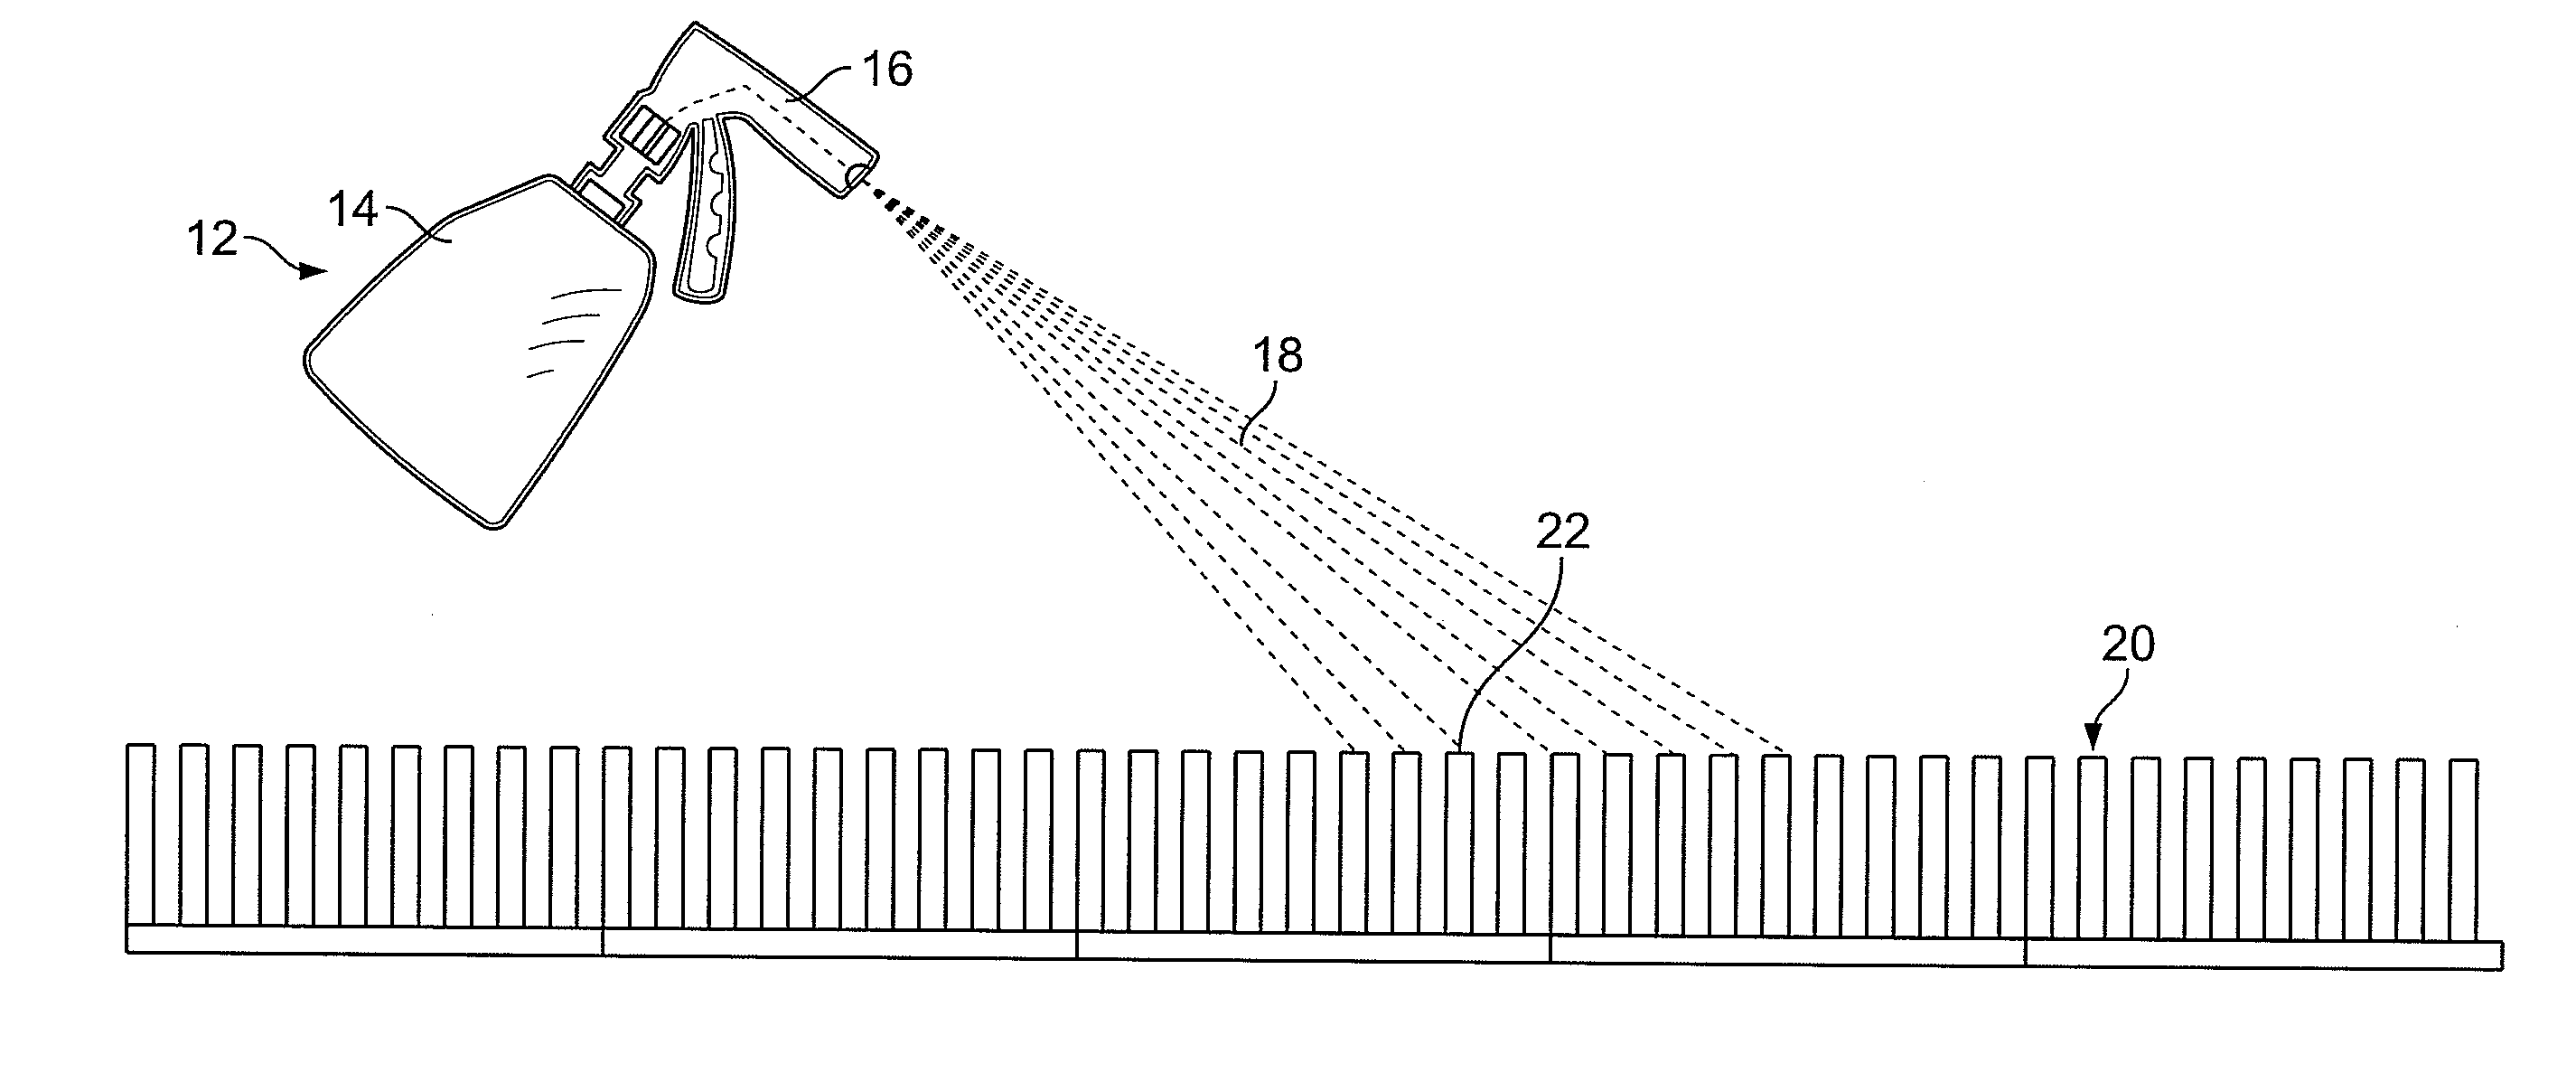 Composition for application to a surface